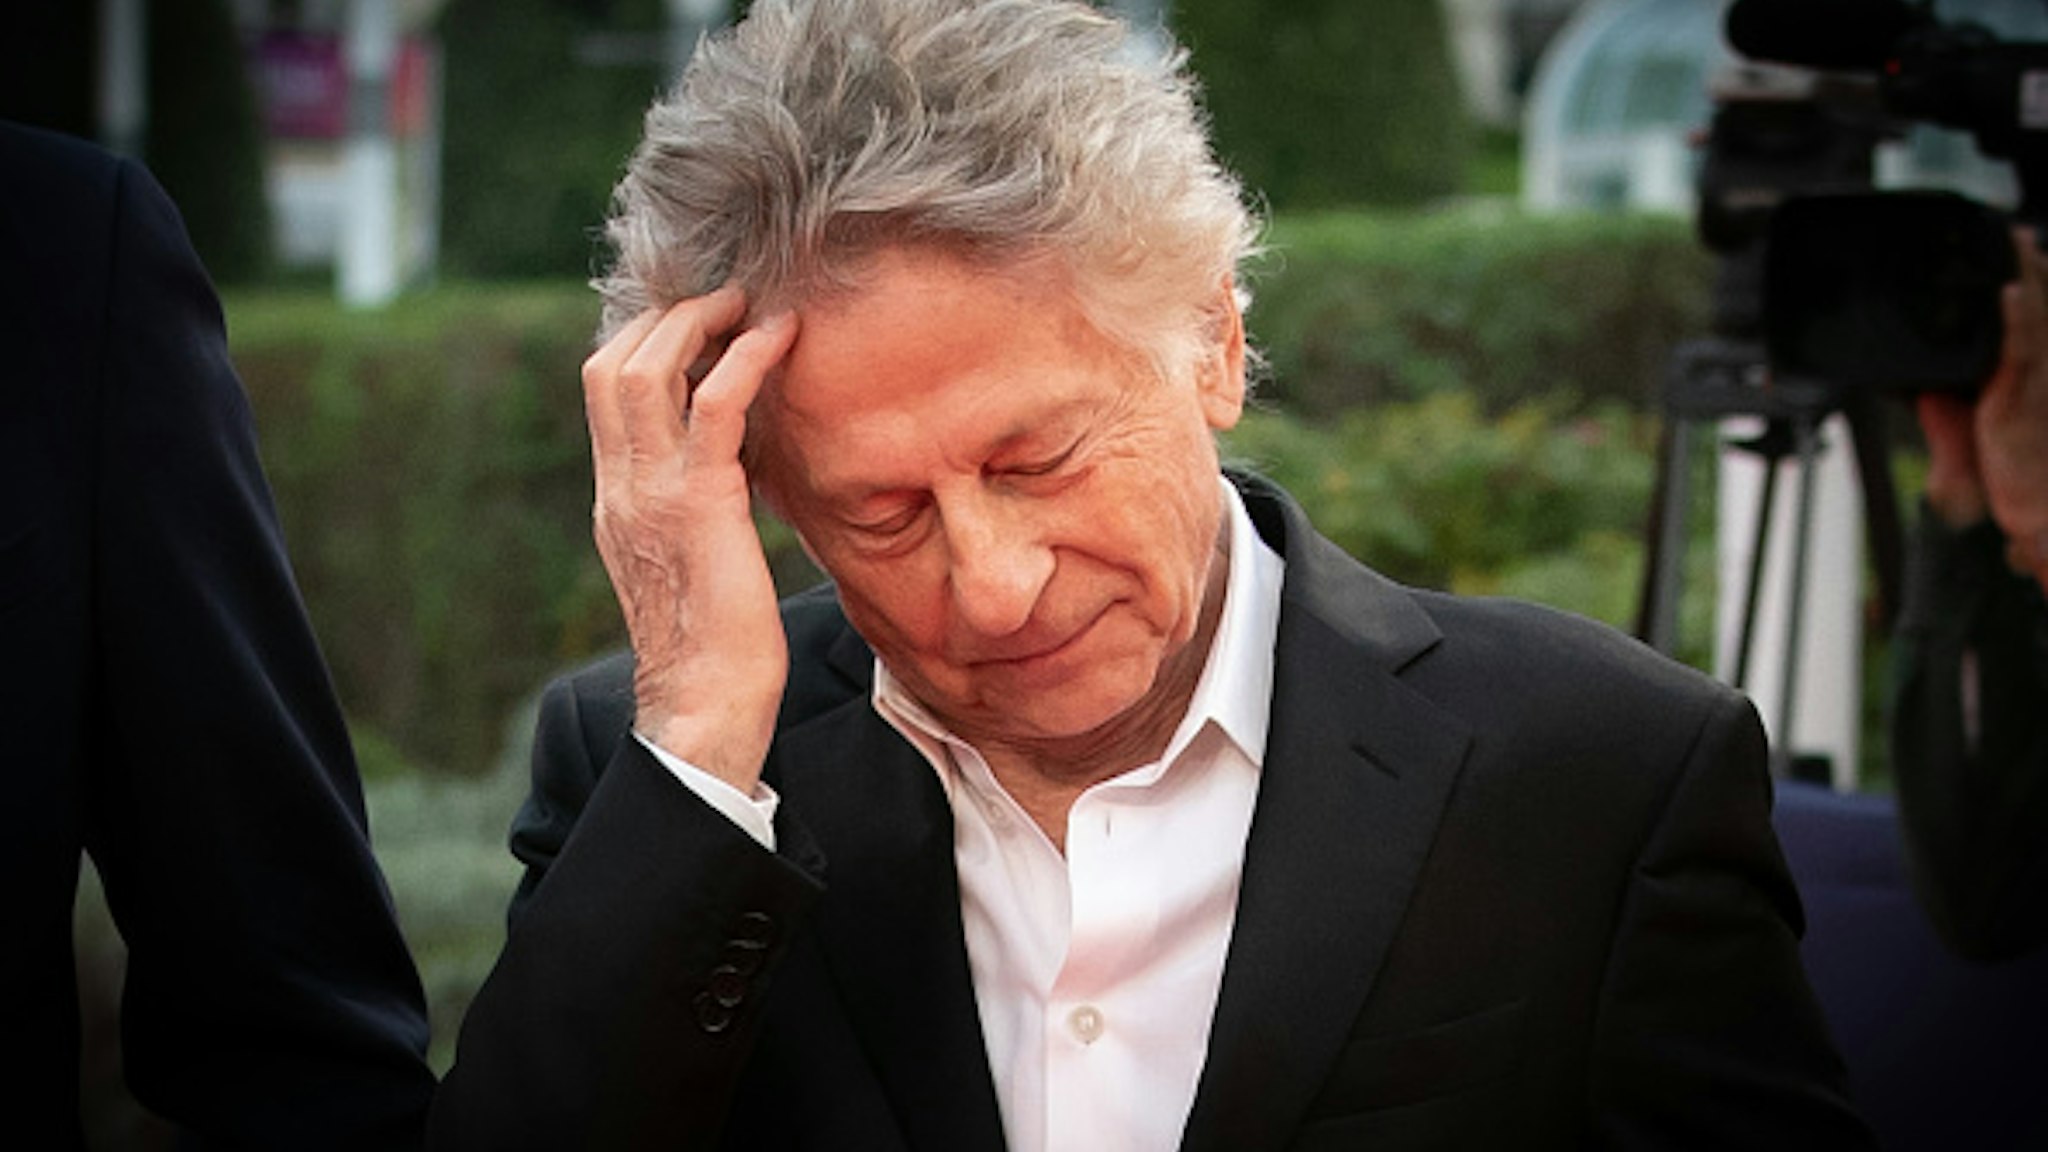 French-Polish director Roman Polanski stands on the red carpet of the 45th Deauville US Film Festival, in Deauville, northern France on September 7, 2019.